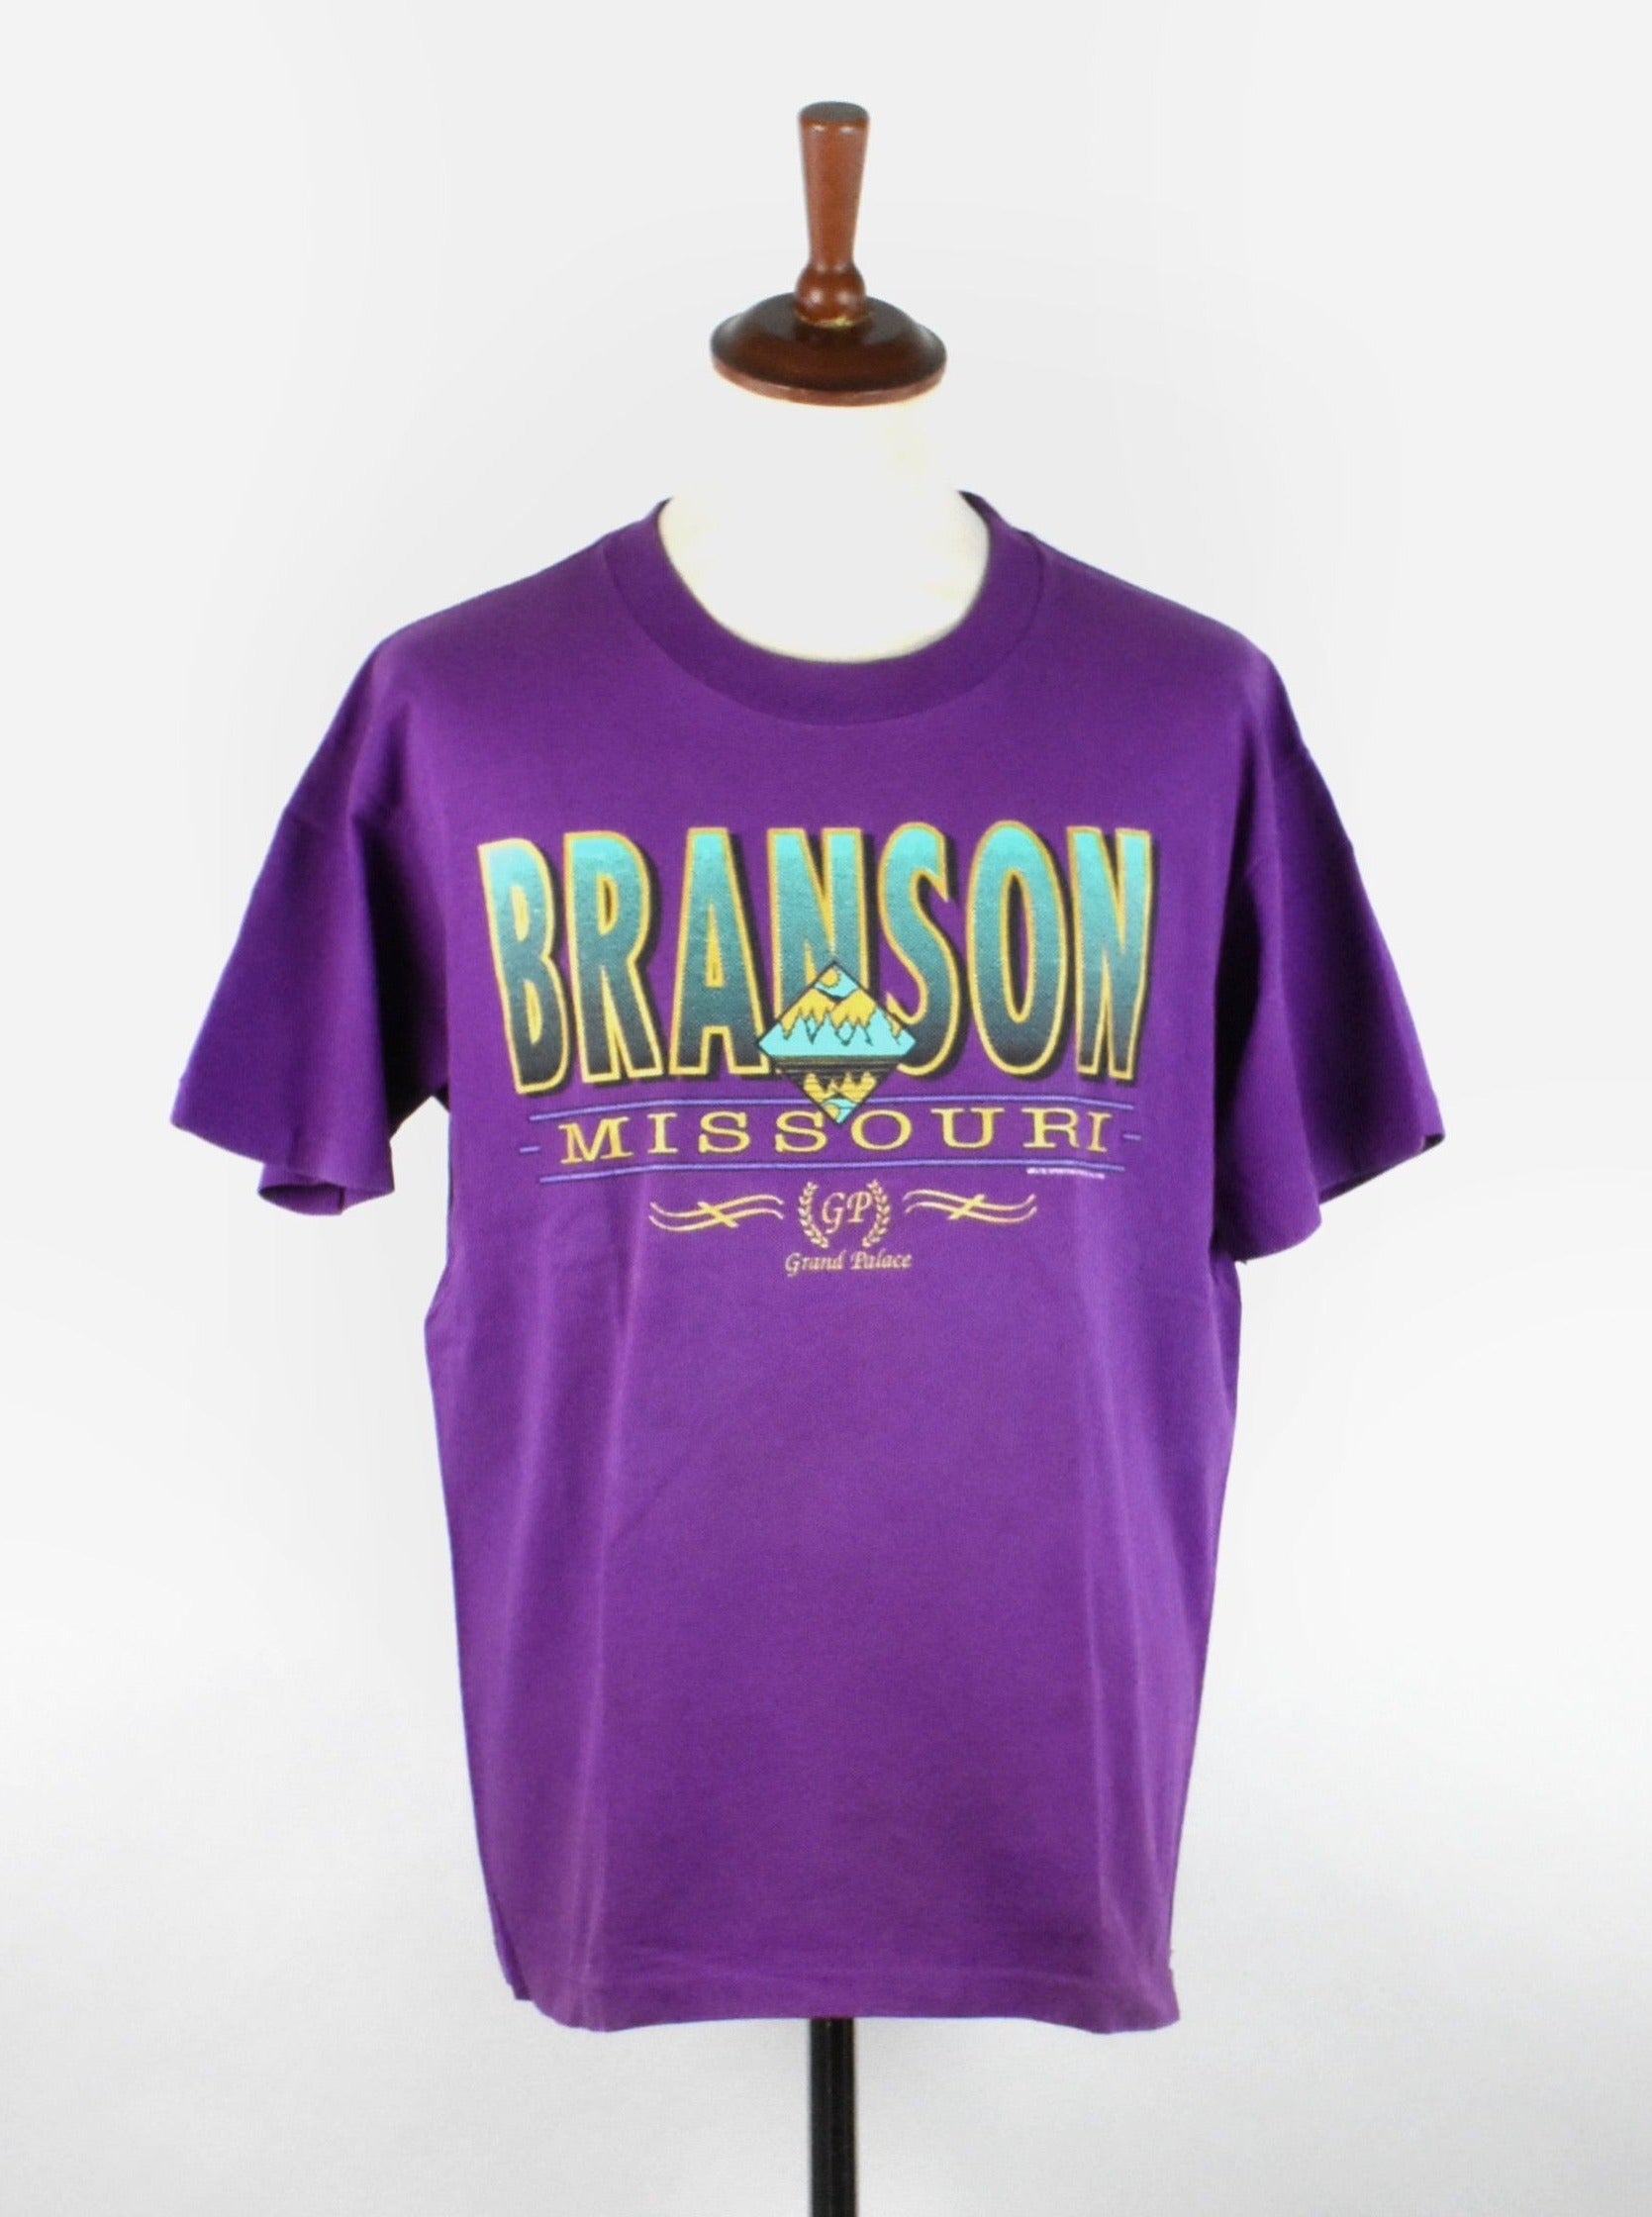 Grand Palace Theater - Branson, Missouri T-Shirt, Size Large, Made in ...